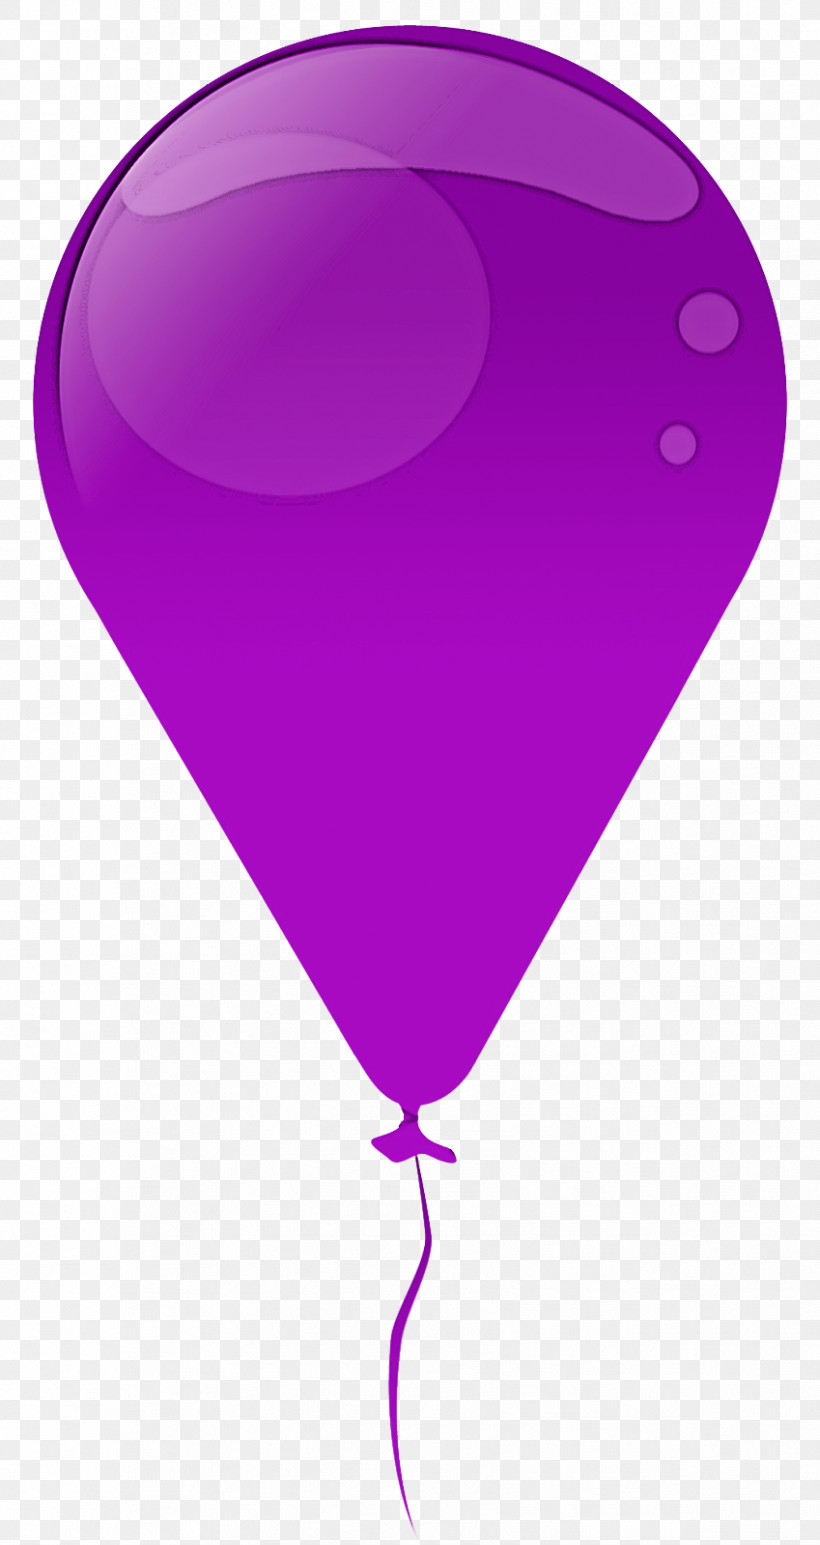 Violet Purple Balloon Pink Heart, PNG, 849x1600px, Violet, Balloon, Heart, Magenta, Pink Download Free